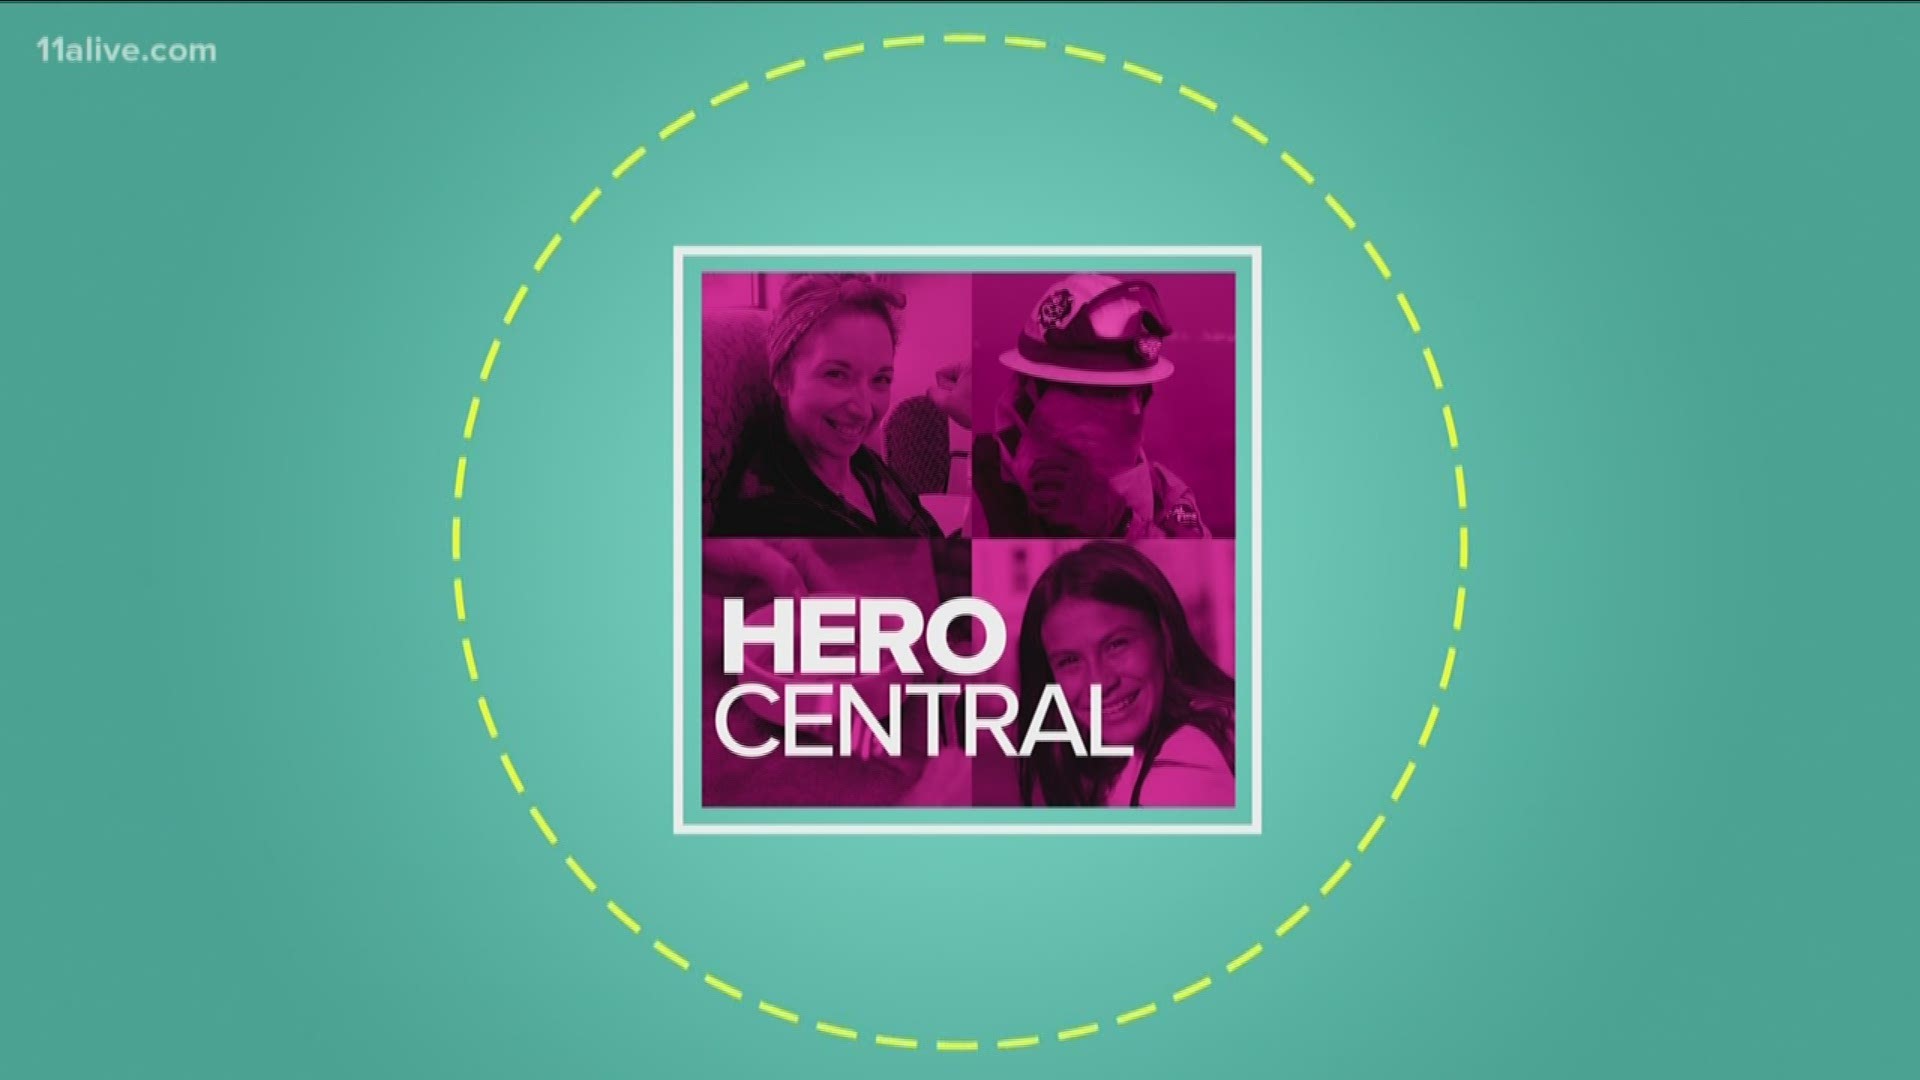 Here's the best of "Hero Central" from this year.